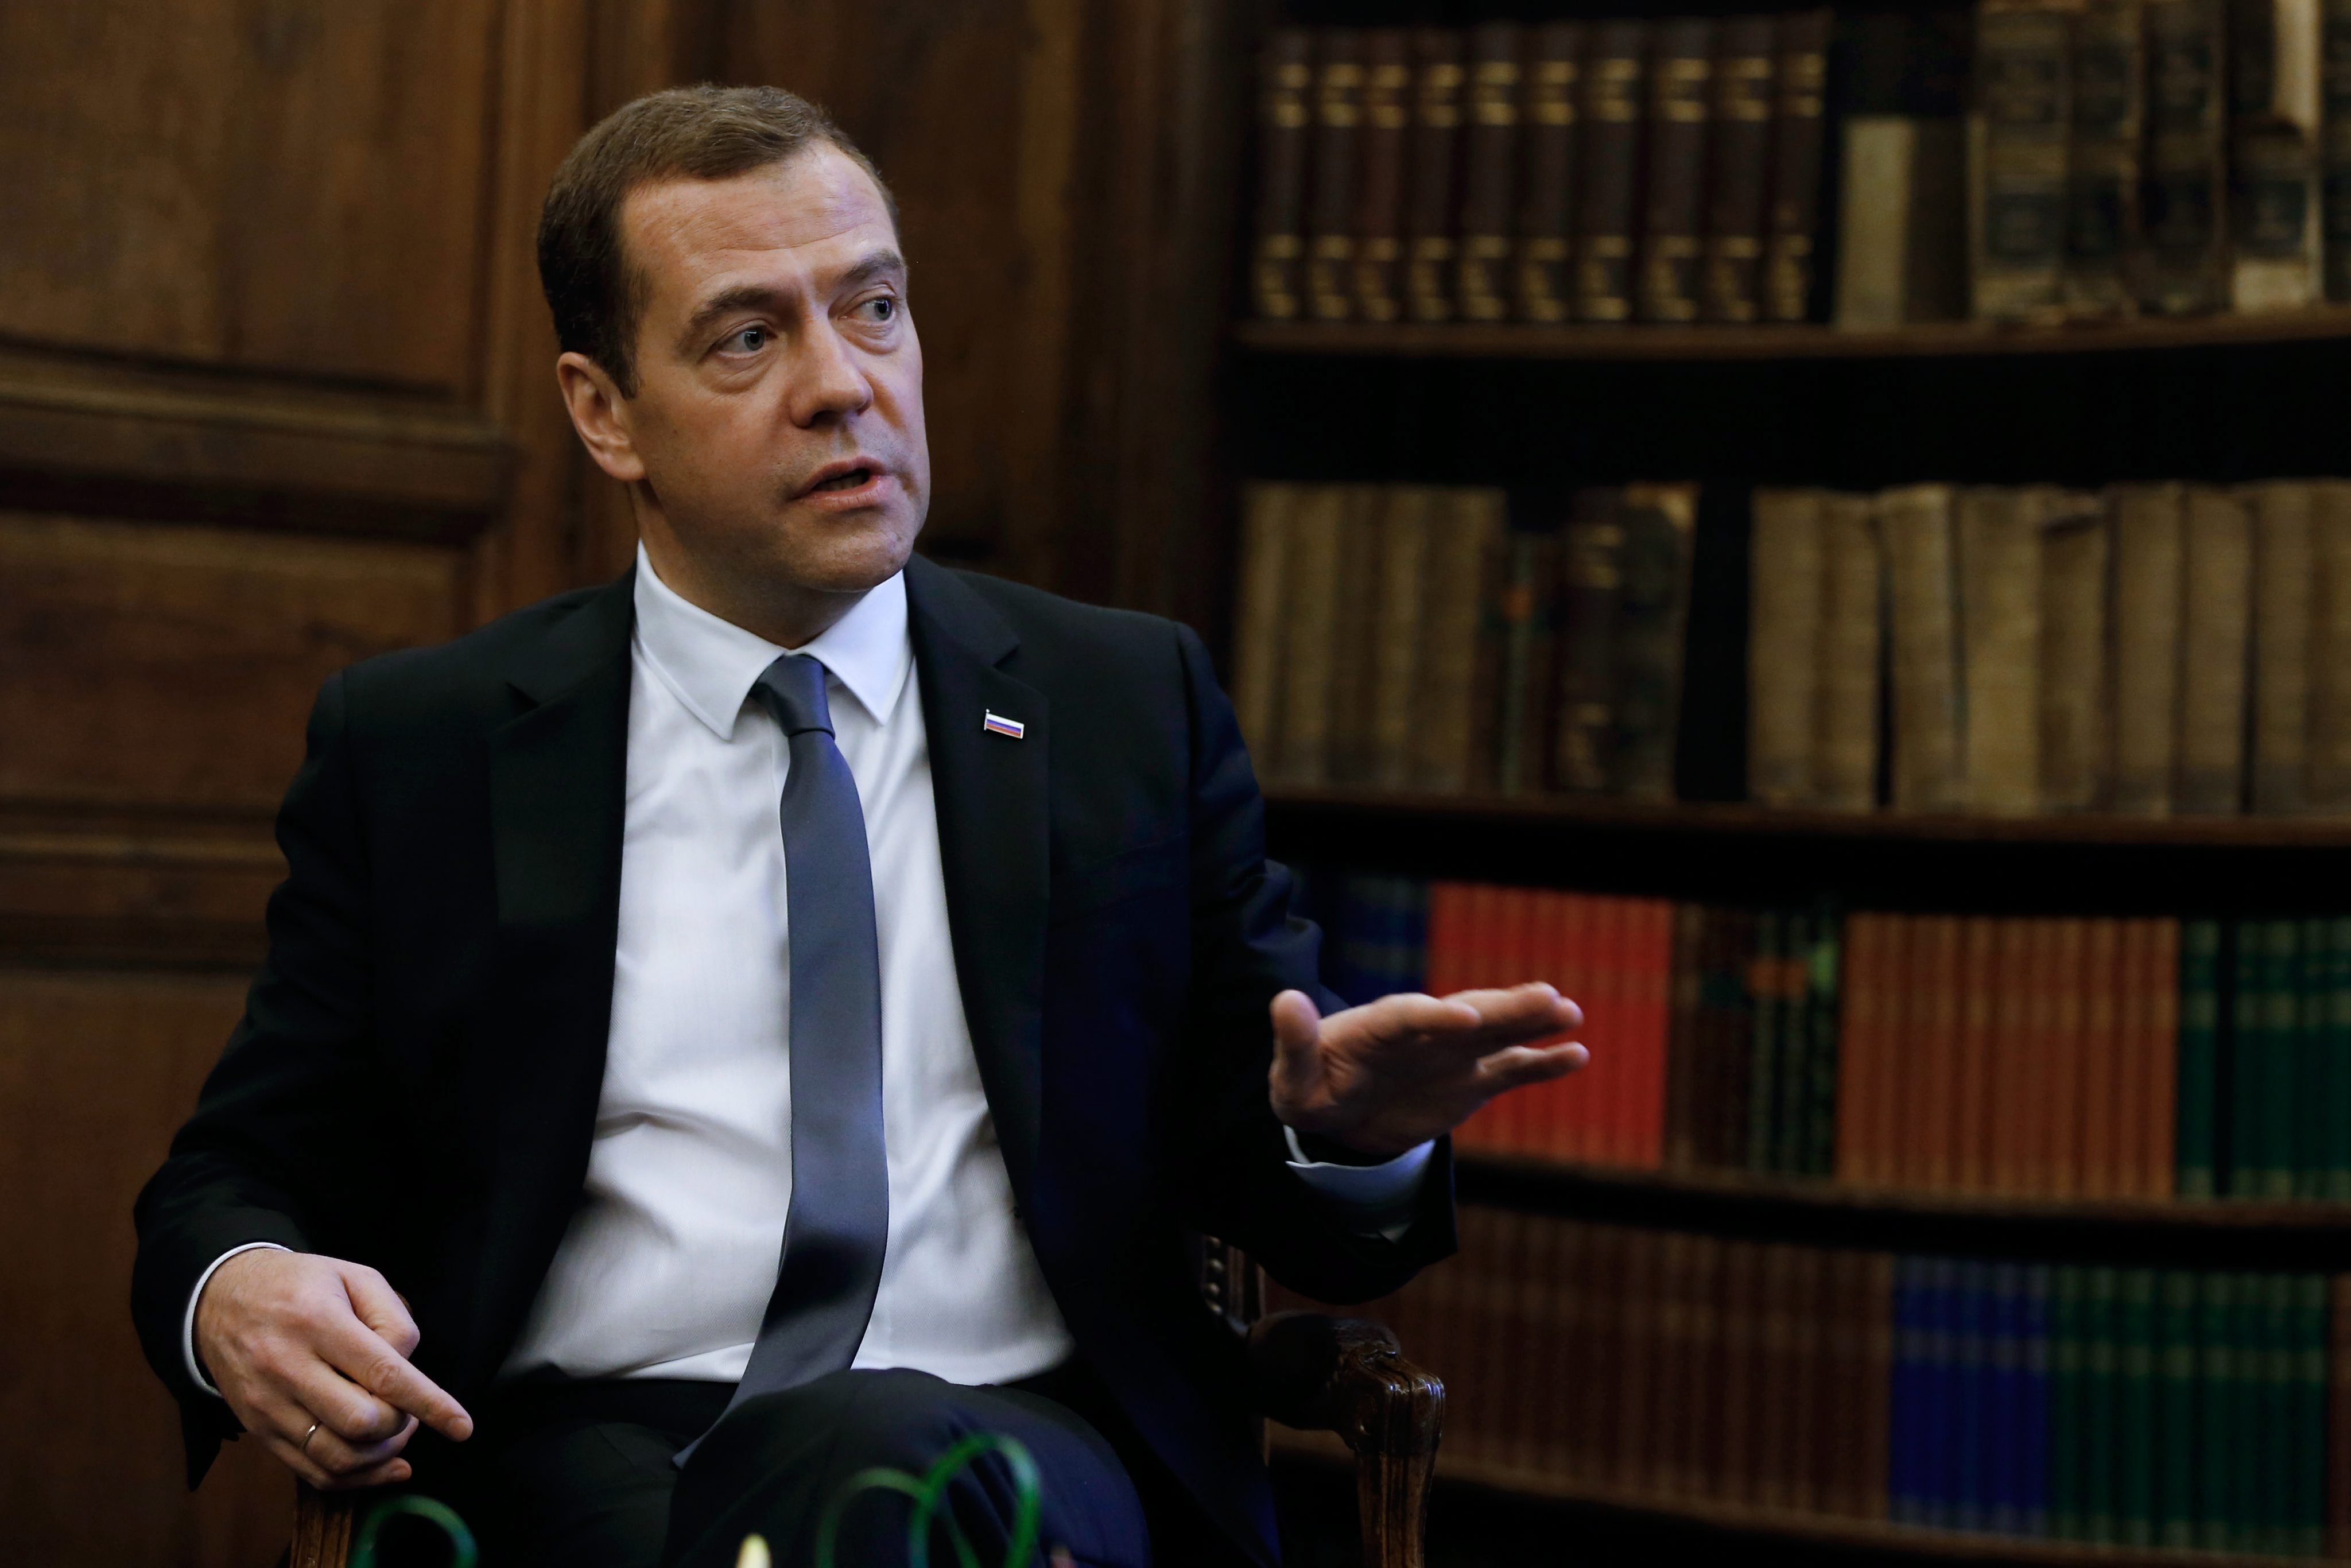 Interview of Russian Prime Minister Dmitry Medvedev